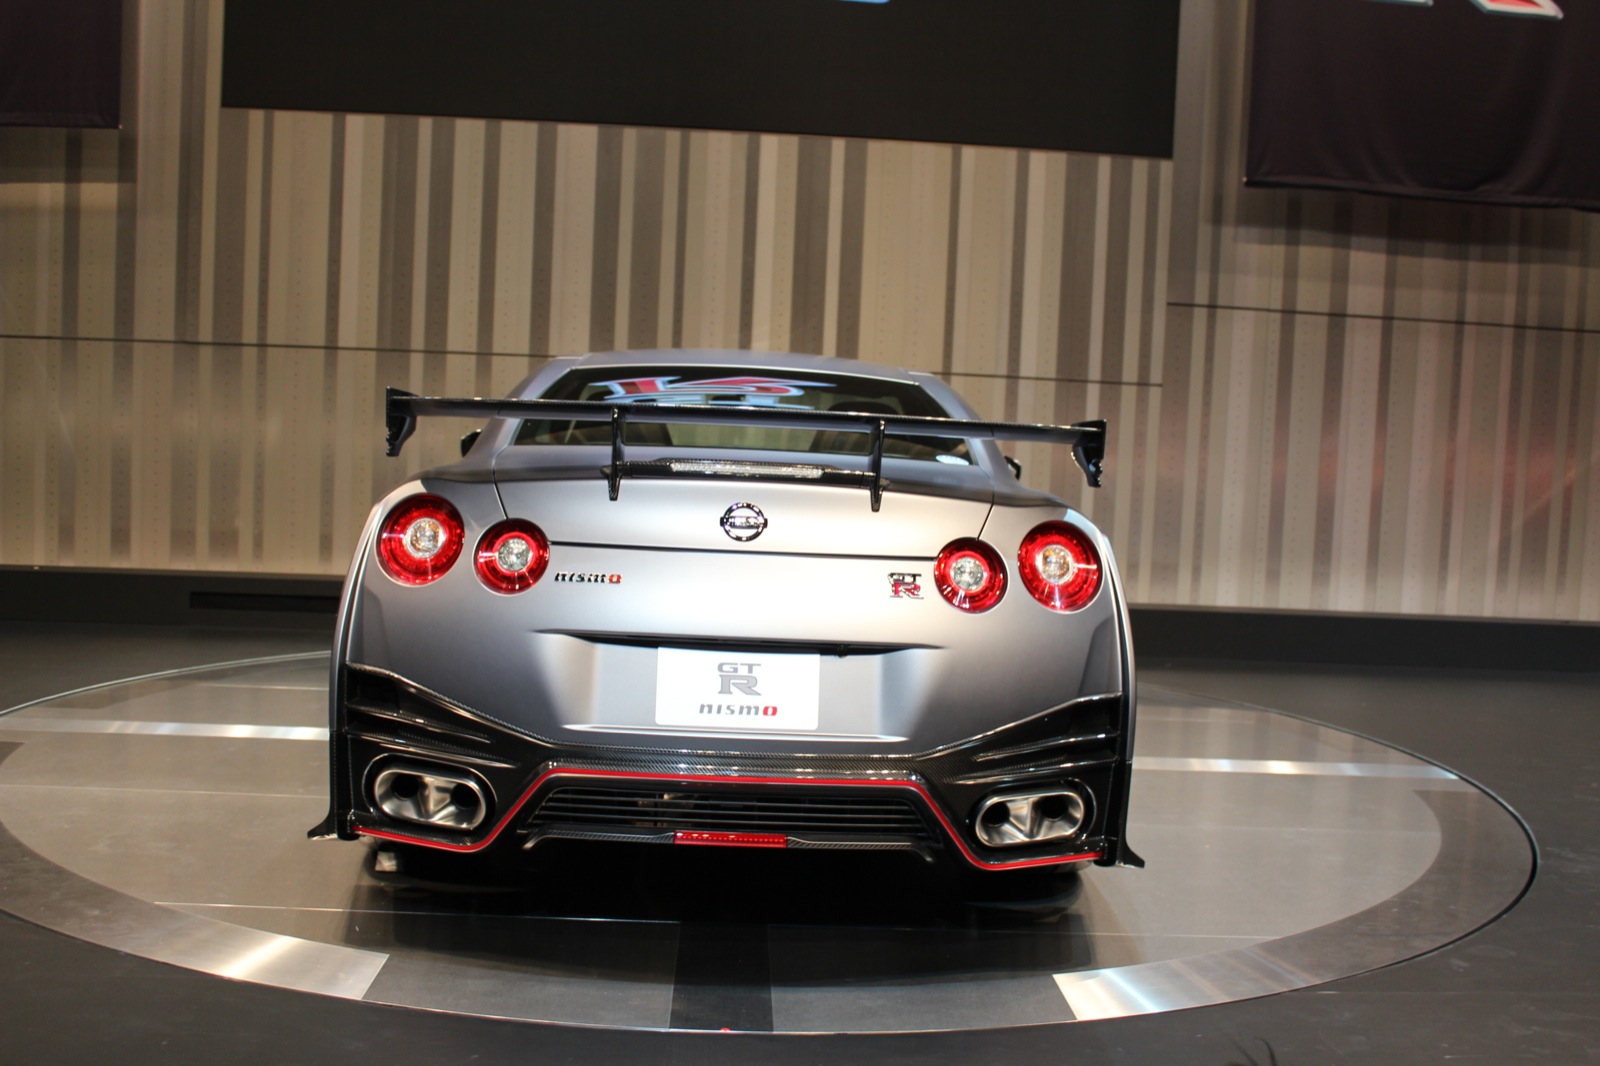 2015-nissan-gt-r-nismo--tokyo-motor-show-preview-event-nissan-global-headquarters_100446451_h